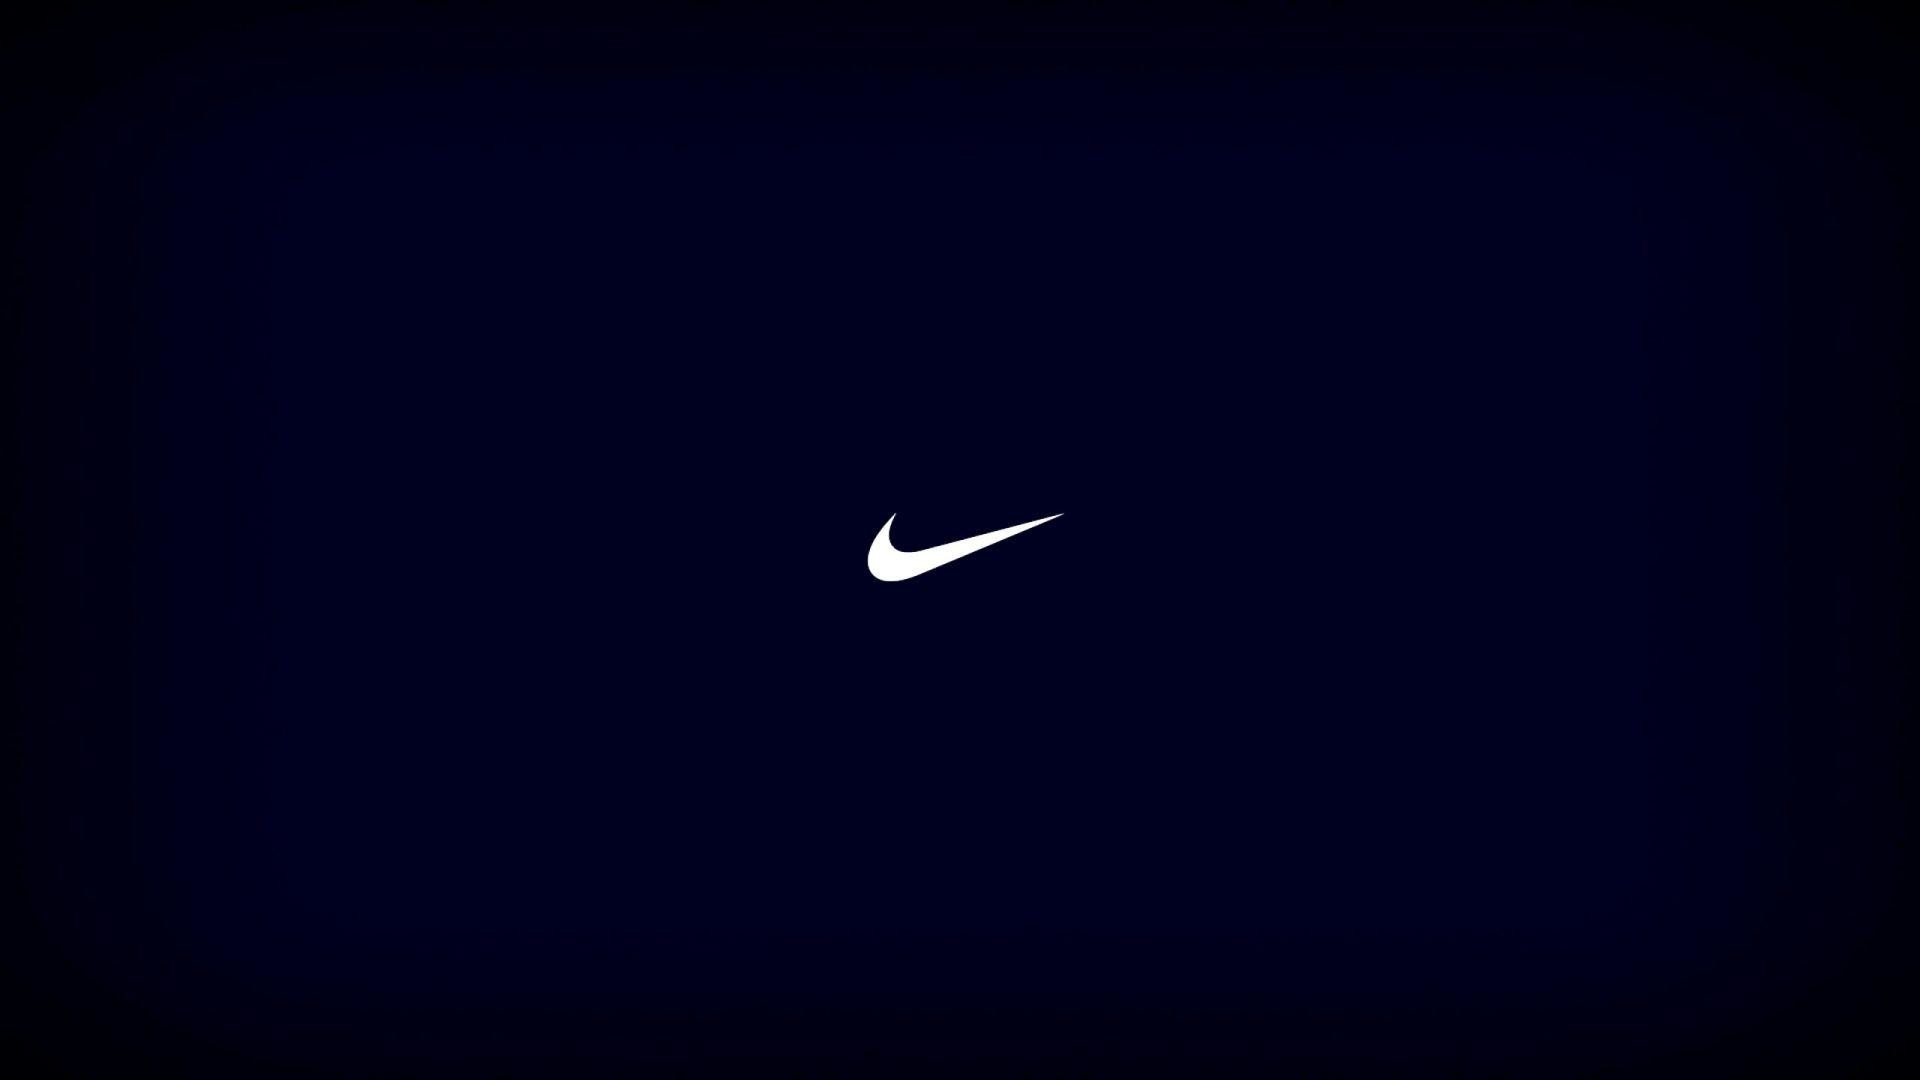 1920x1080 Download Free Nike Sb Logo Wallpapers | Wallpapers, Backgrounds .